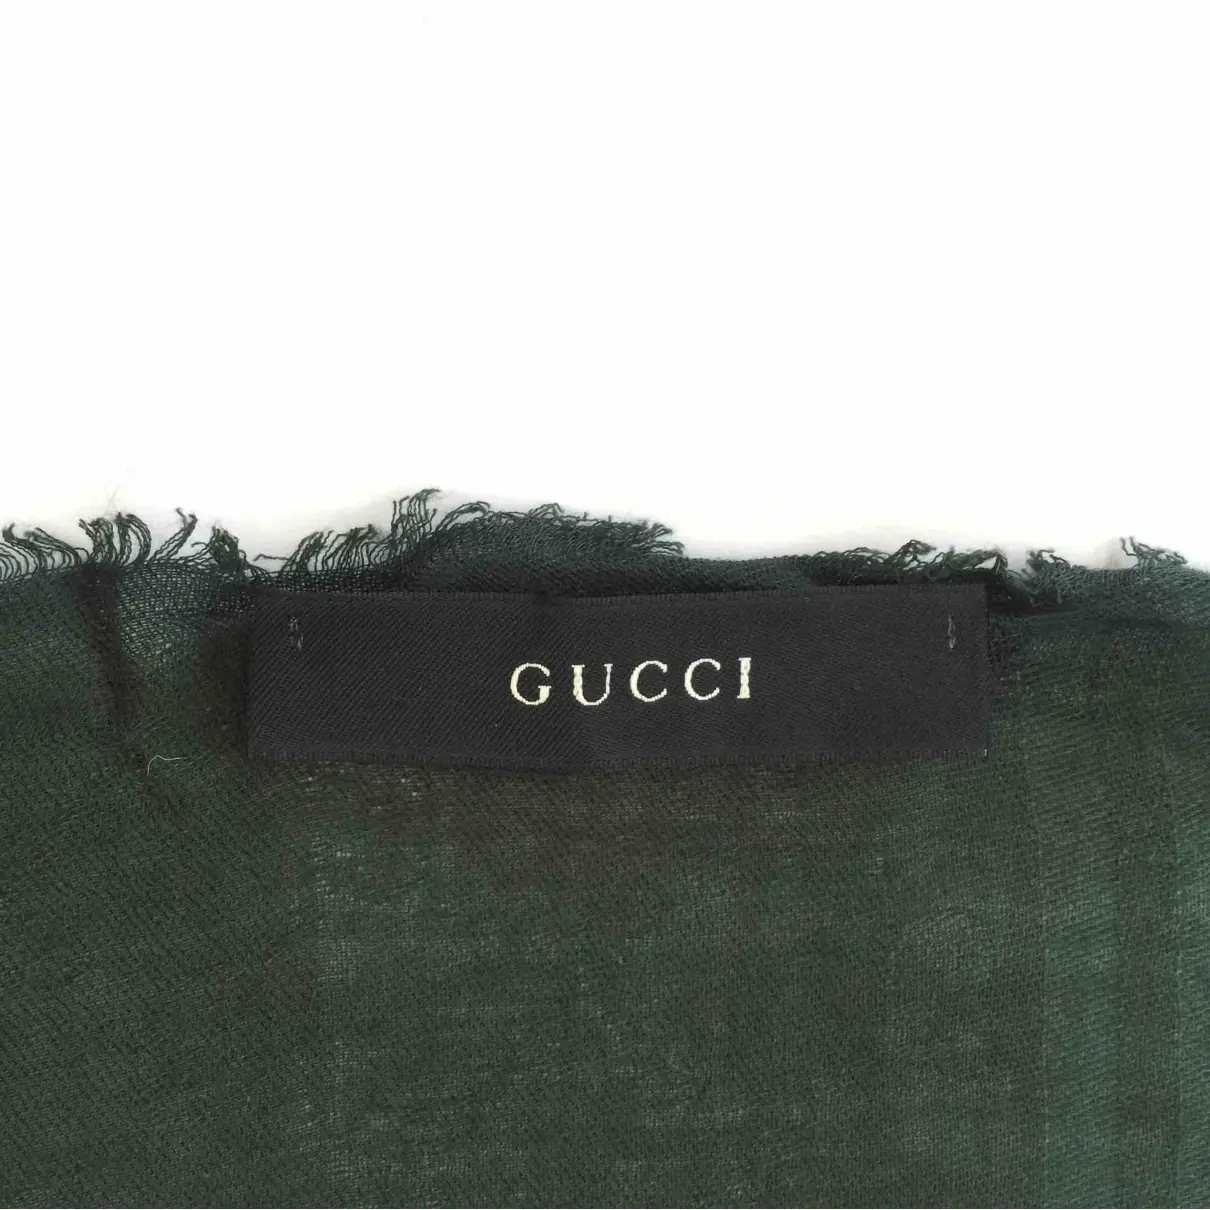 Buy Gucci Stole online